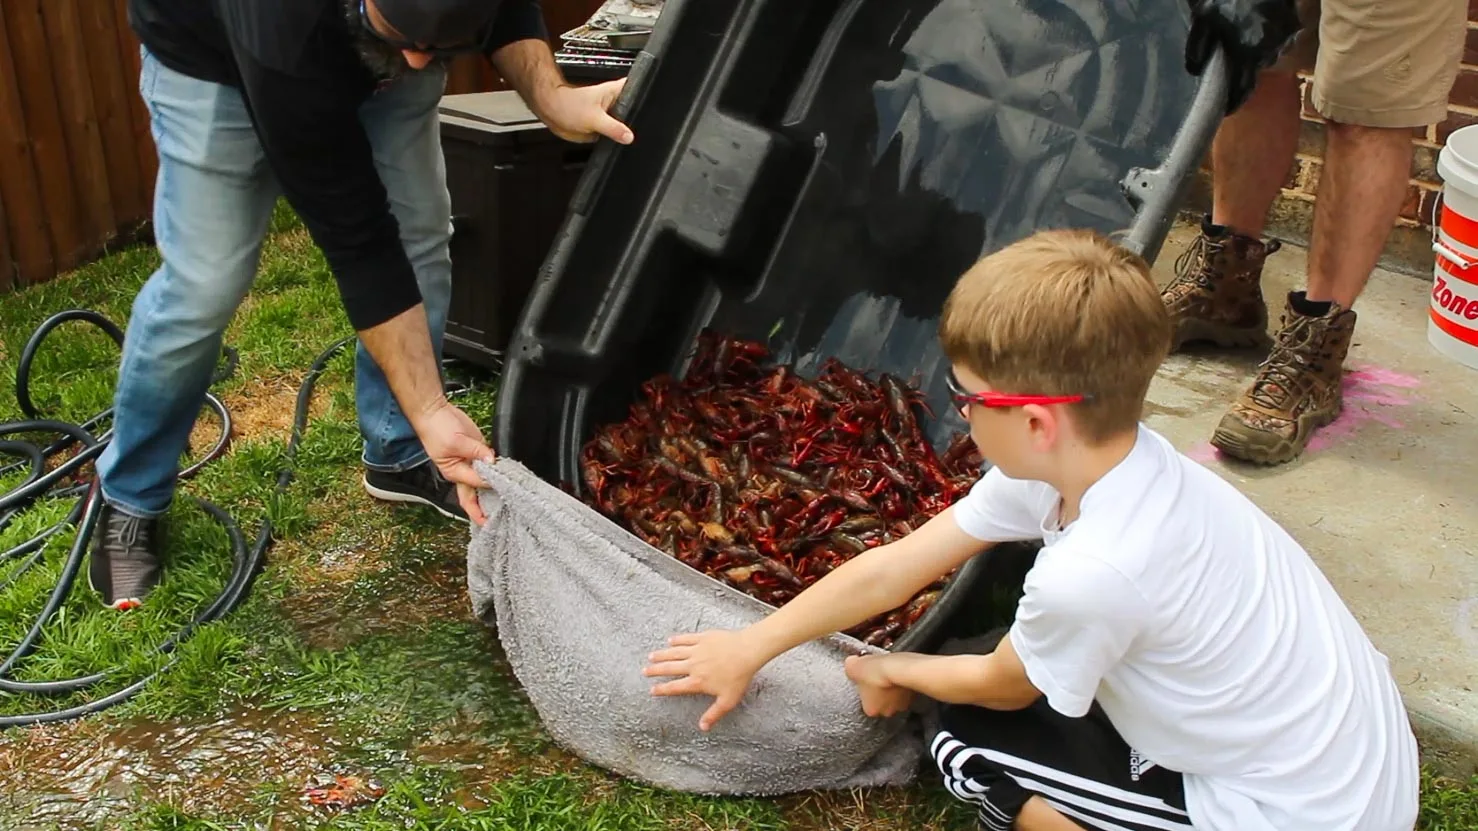 Draining the cleaned crawfish between batches of cleaning so that they do not drown. 